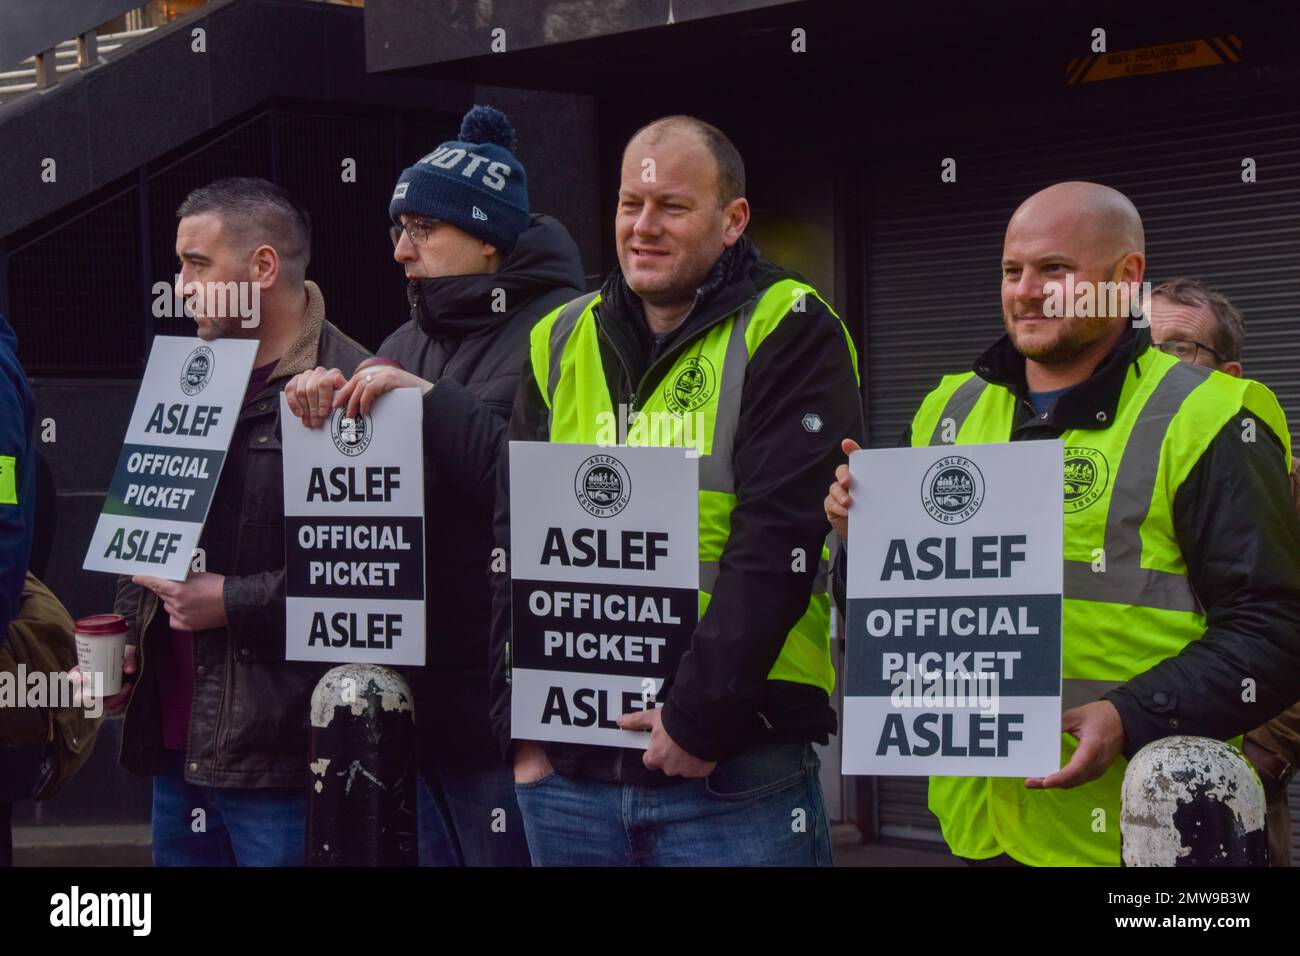 London, UK. 1st February 2023. ASLEF picket outside Euston Station as train drivers go on strike. The day has seen around half a million people staging walkouts around the UK, including teachers, university staff, public service workers and train drivers. Stock Photo